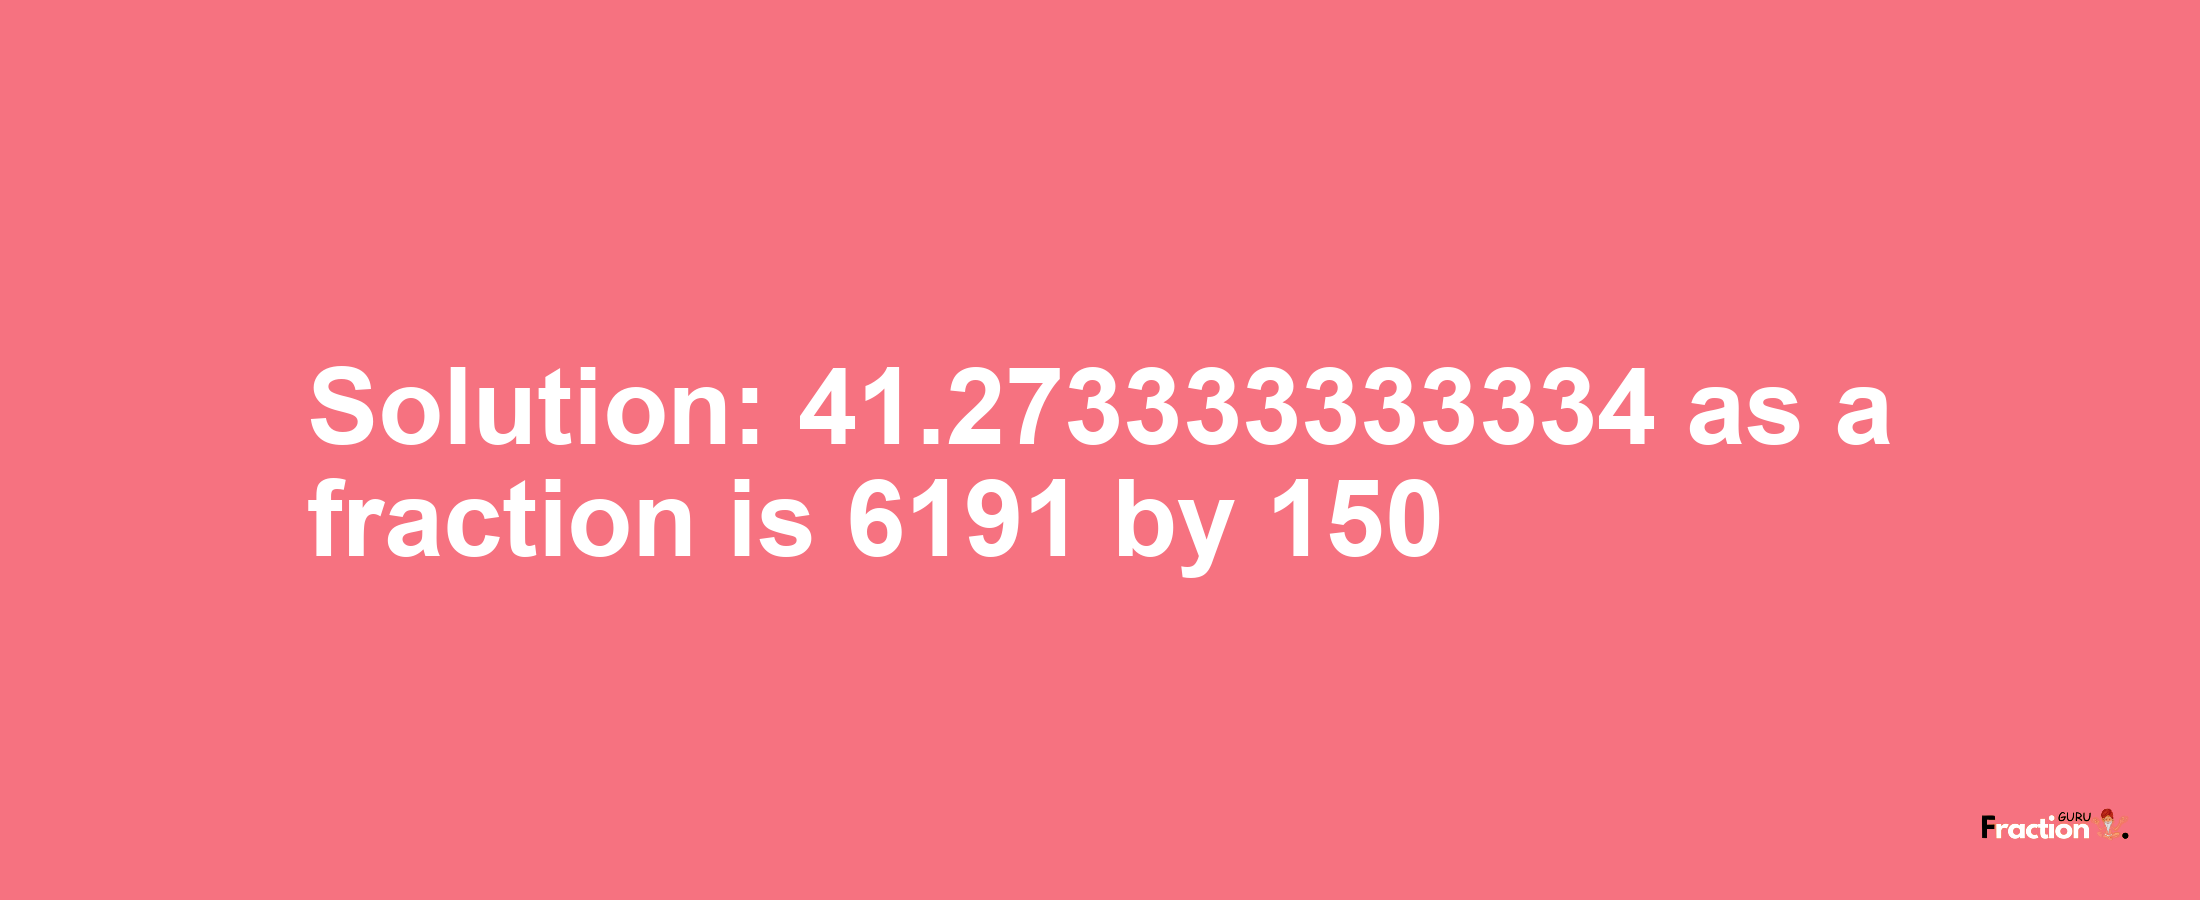 Solution:41.273333333334 as a fraction is 6191/150